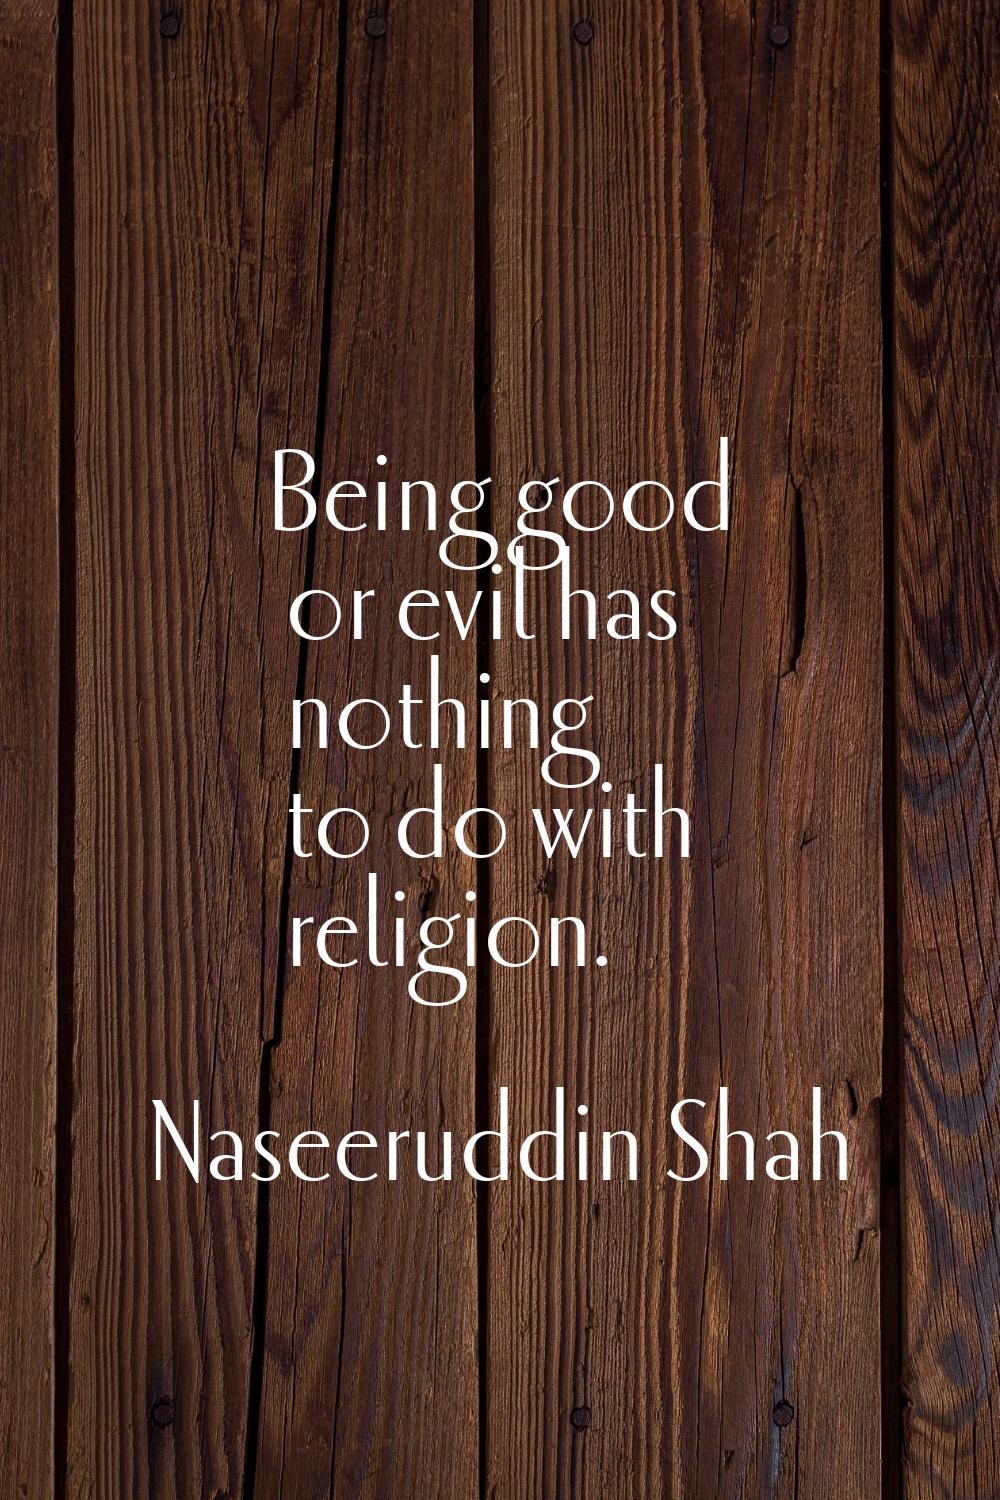 Being good or evil has nothing to do with religion.